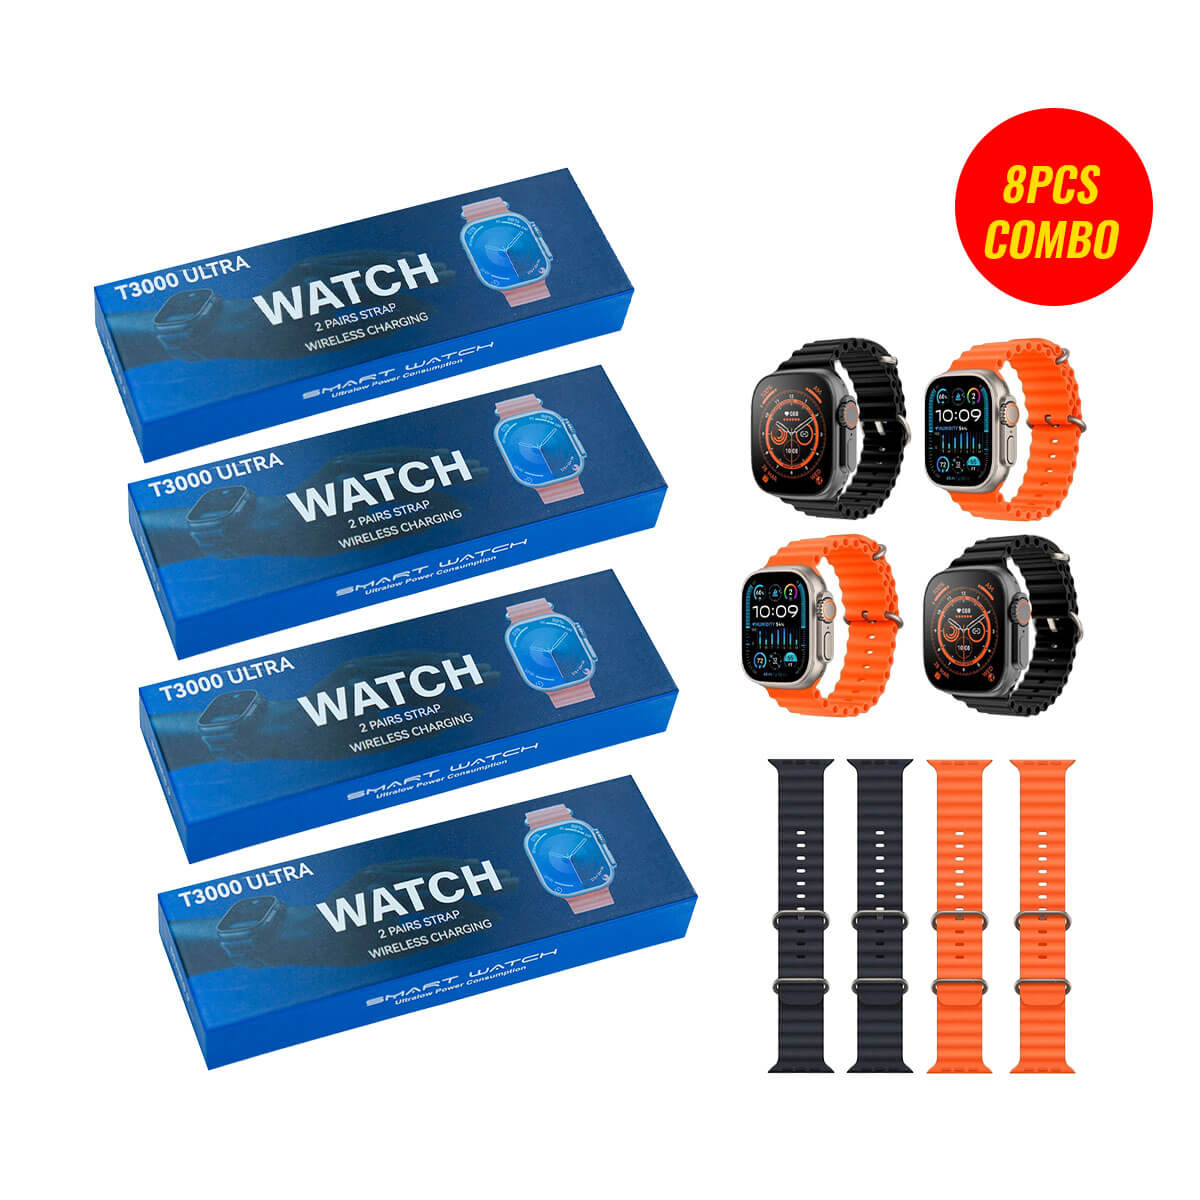 T3000 Ultra Smarwtatch with 2 Strap (8 PCS Combo)